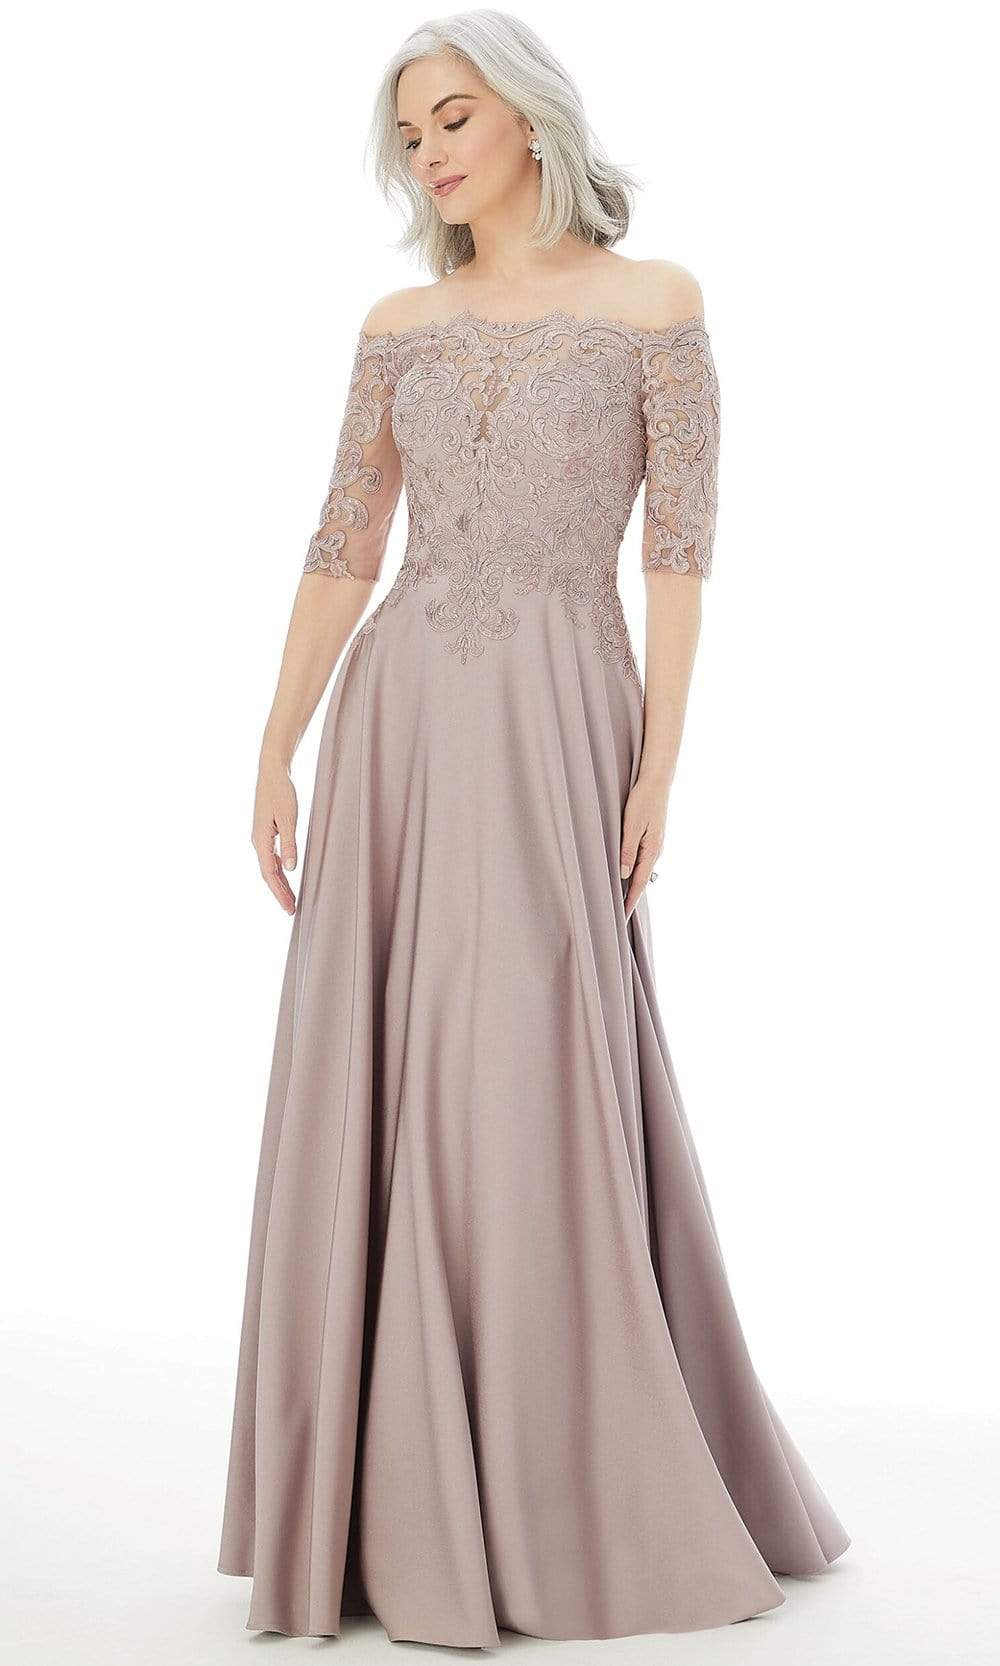 Image of MGNY By Mori Lee - 72220 Off Shoulder Embroidered Lace Crepe Gown